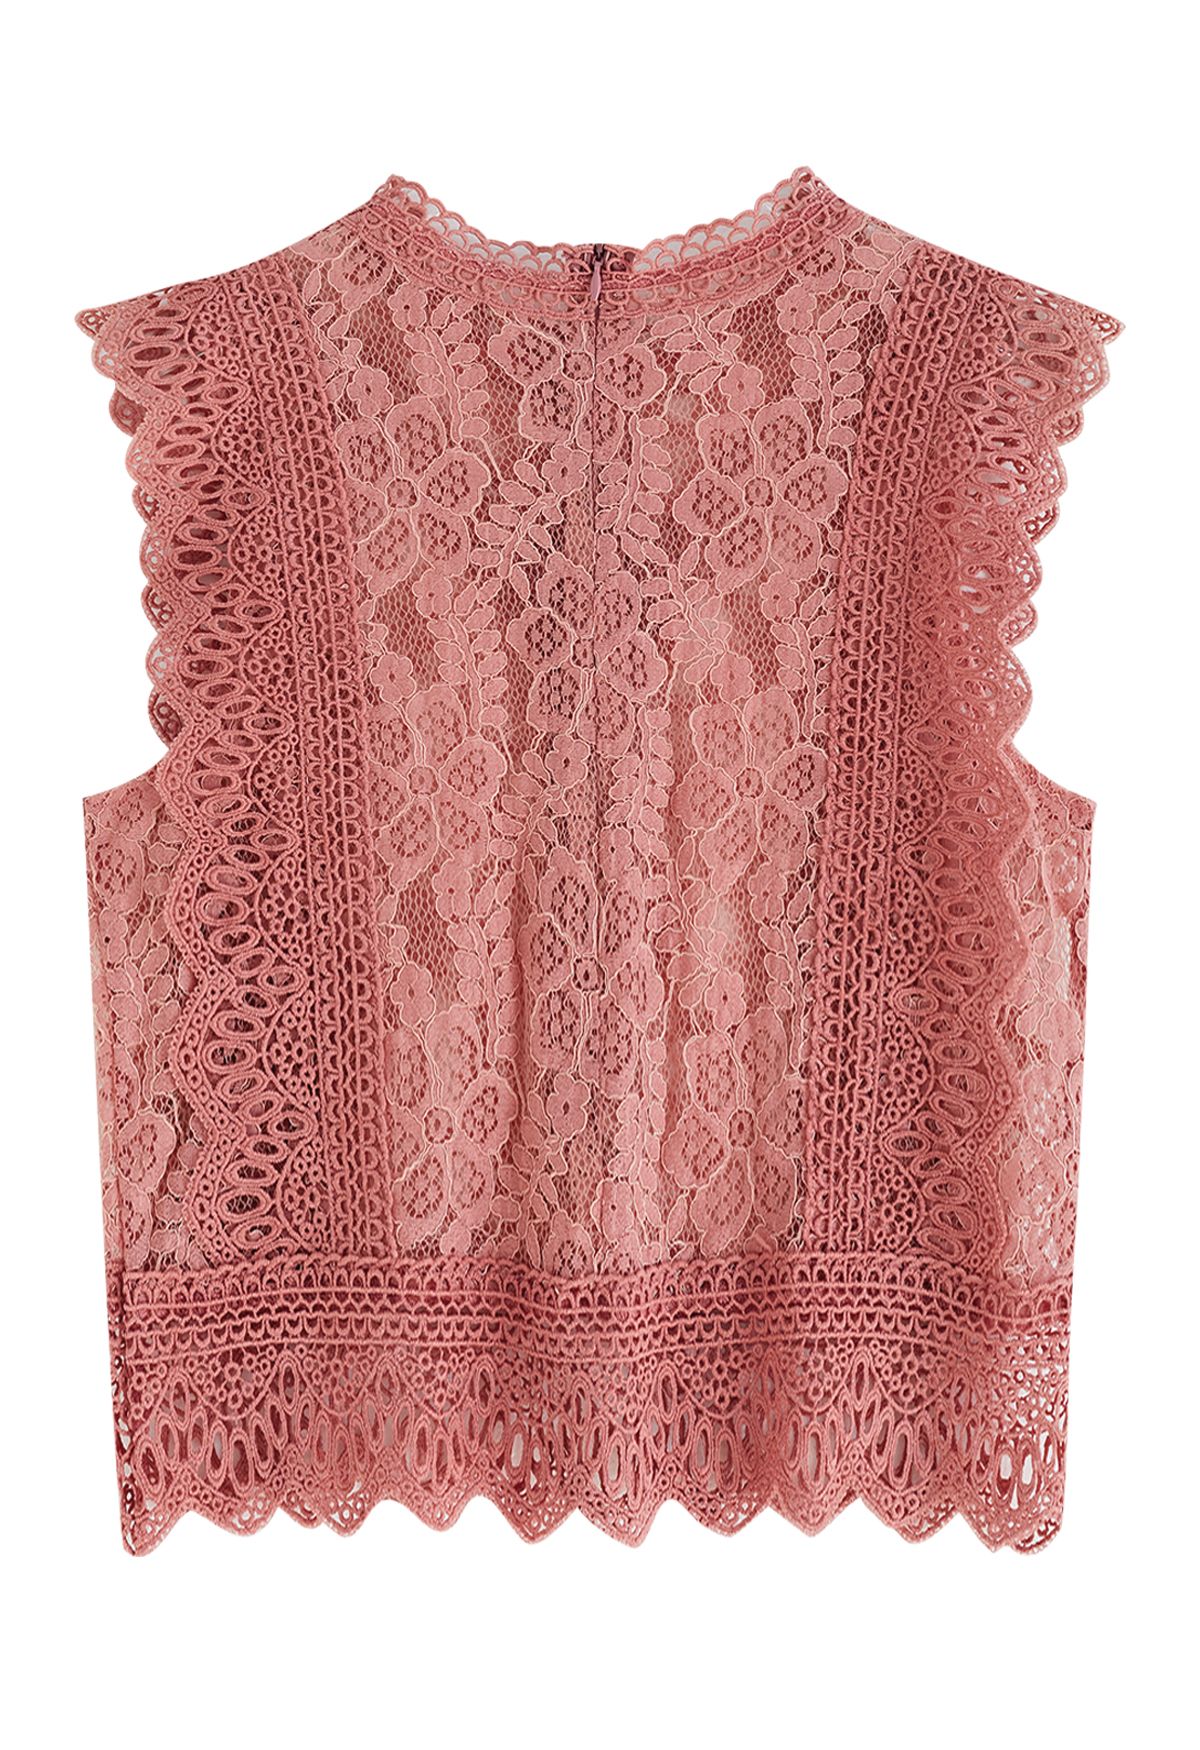 Your Sassy Start Sleeveless Crochet Lace Top in Coral